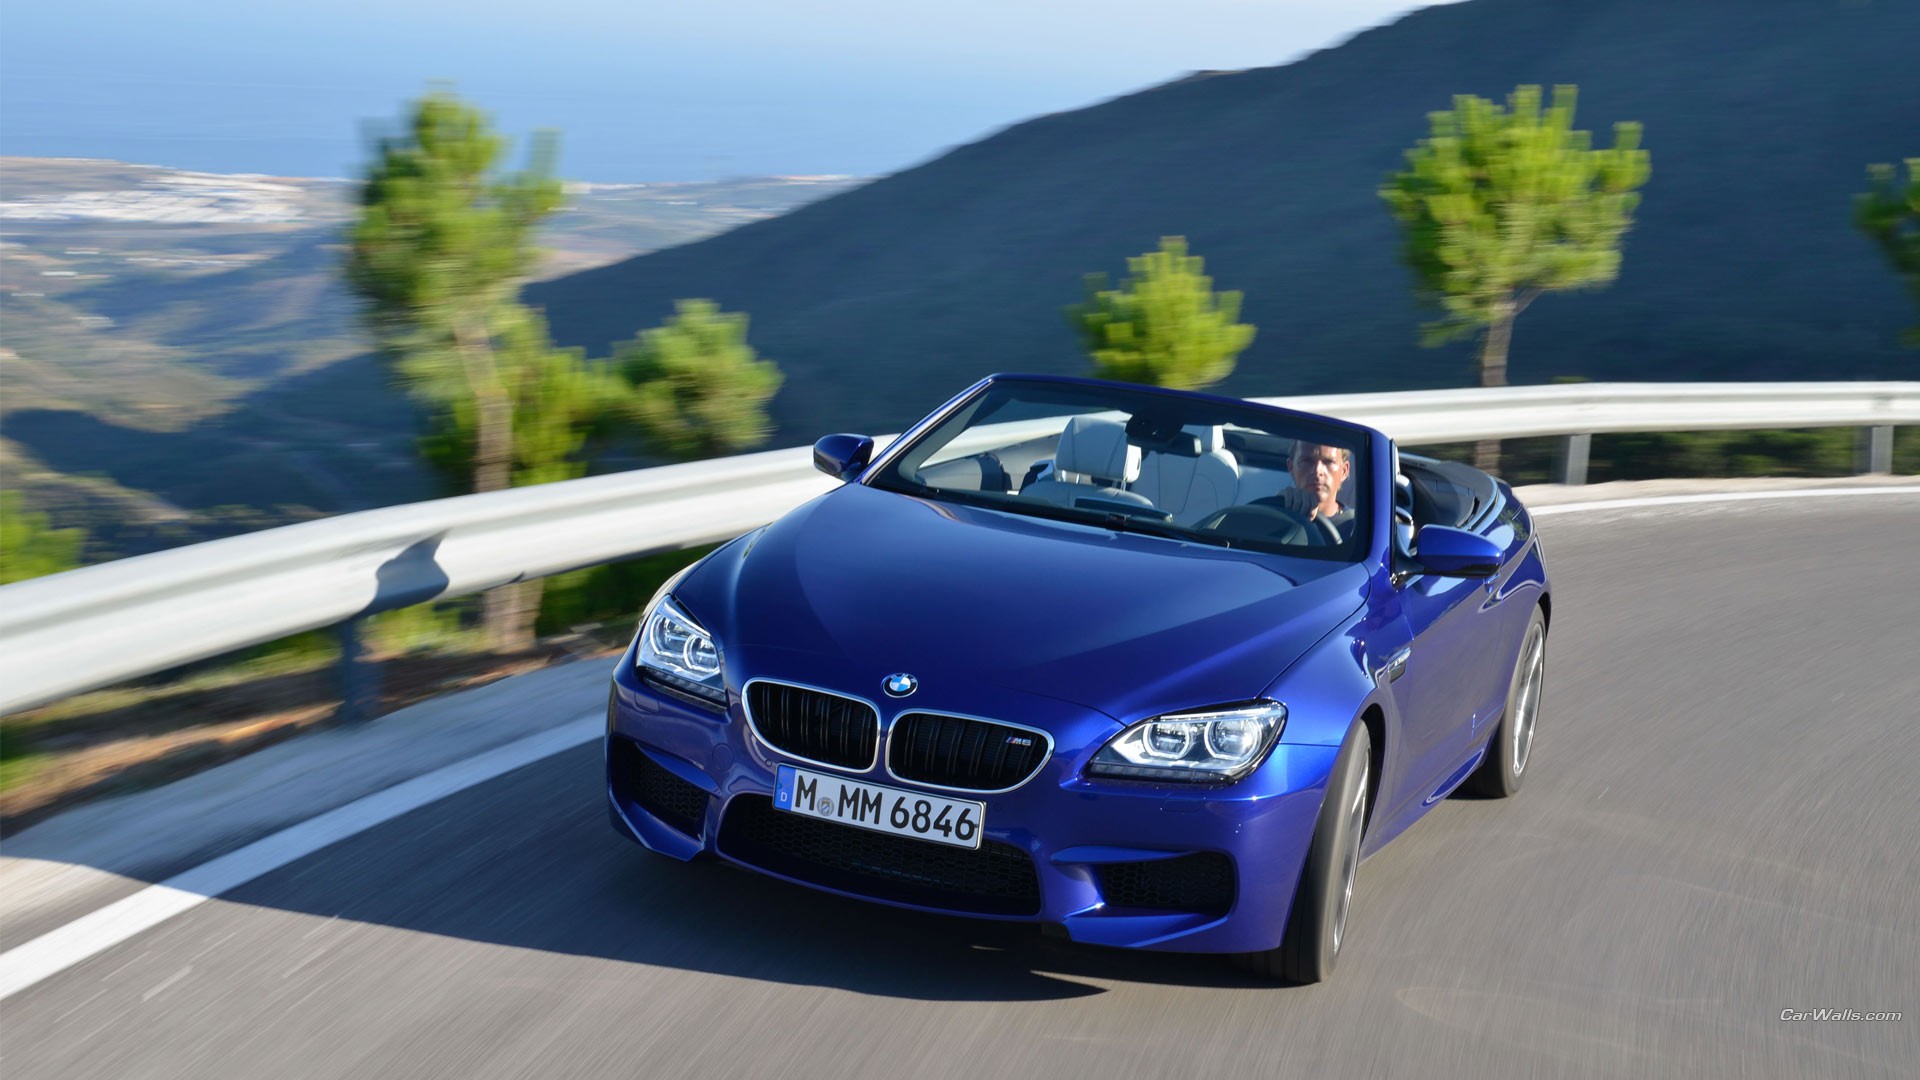 General 1920x1080 convertible blue cars Roadster German cars BMW M6 frontal view motion blur watermarked road men driving blurred blurry background sunlight looking at viewer closed mouth licence plates trees vehicle BMW